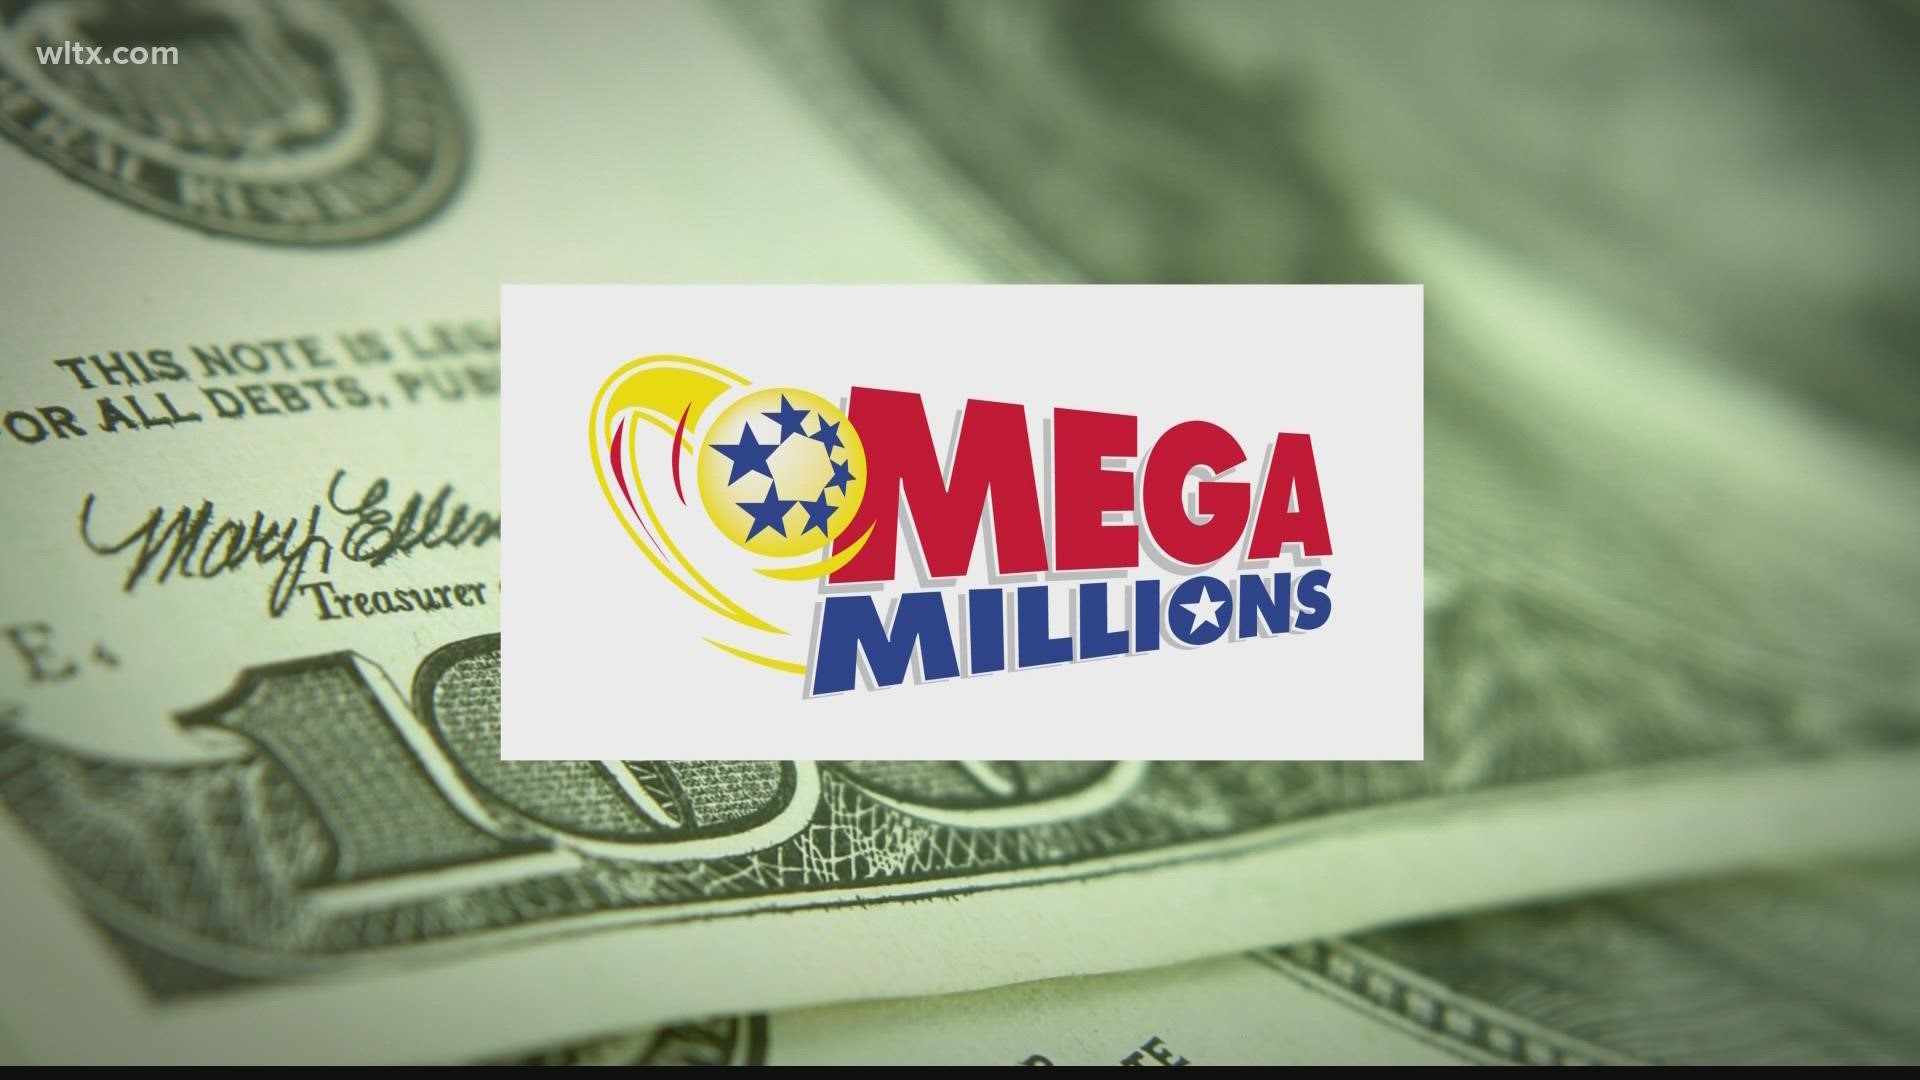 After nearly 8 weeks of waiting, the winner of the third largest jackpot in lottery history has claimed their prize.